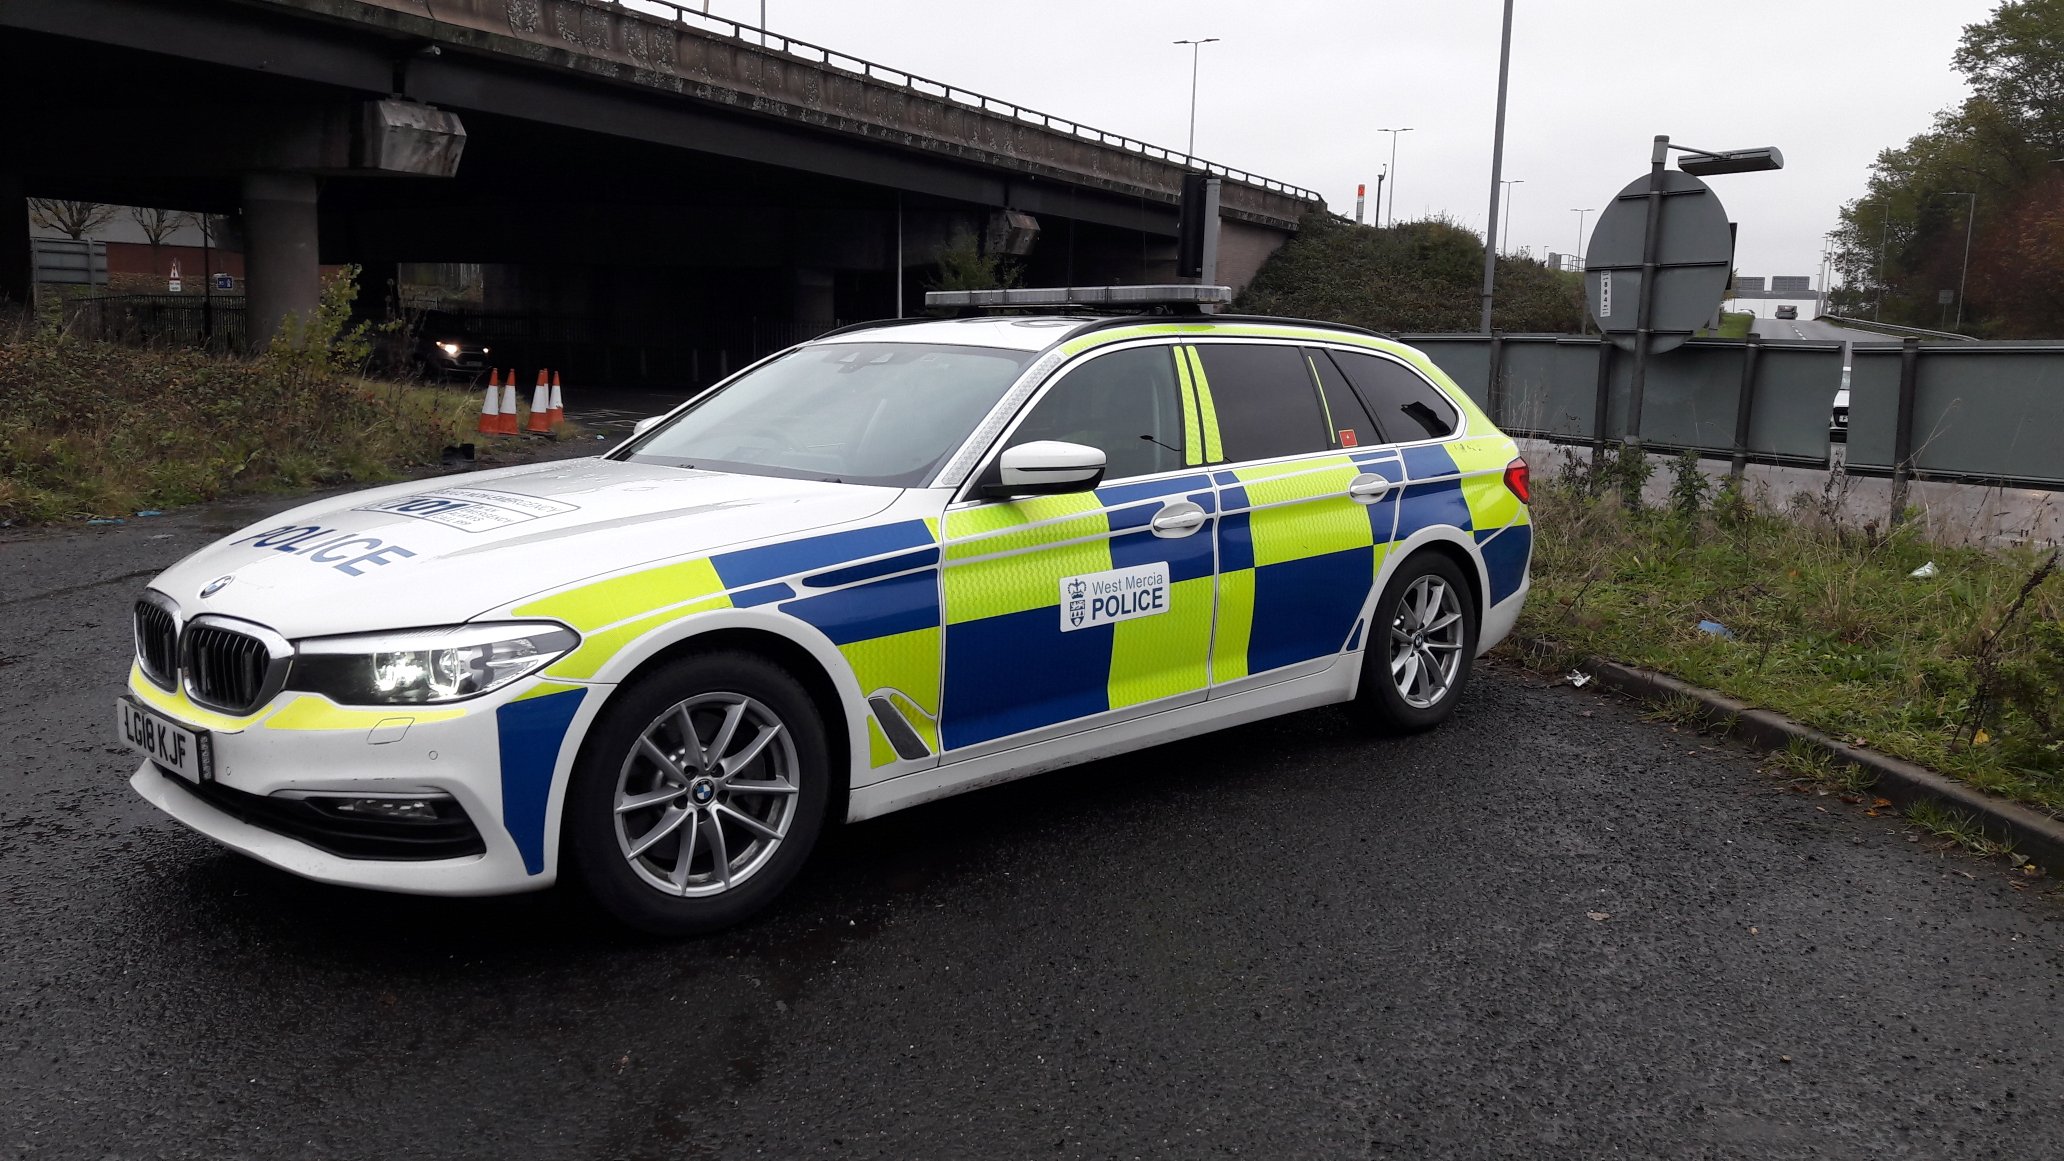 NEWS | Driver arrested for attempting to drive the wrong way down the M5 on New Year’s Eve